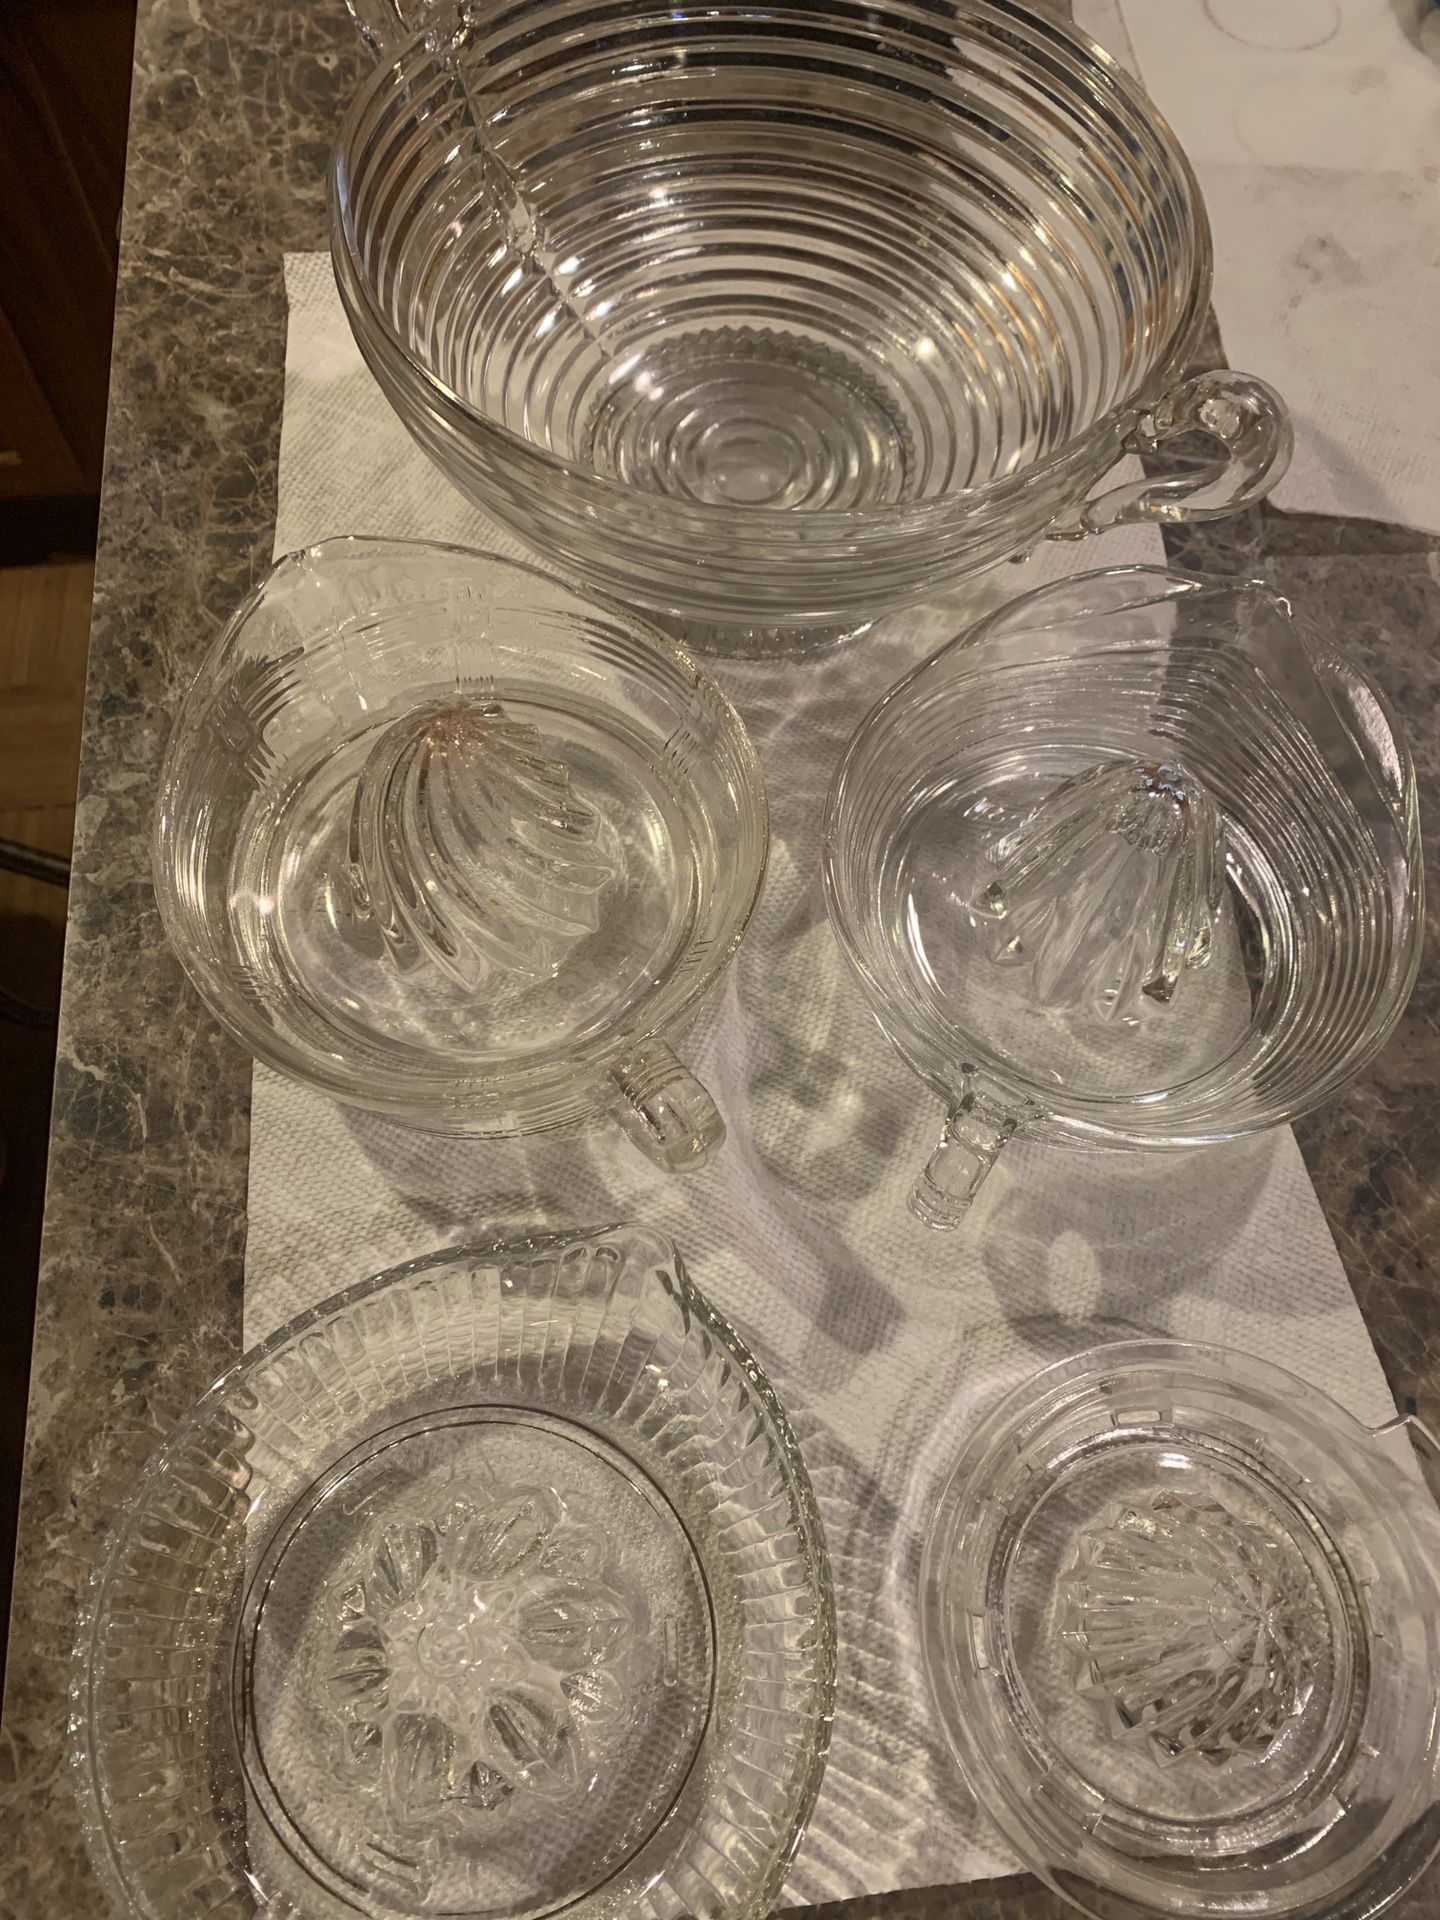 Beautiful etched glass juice strainers and dipping bowl